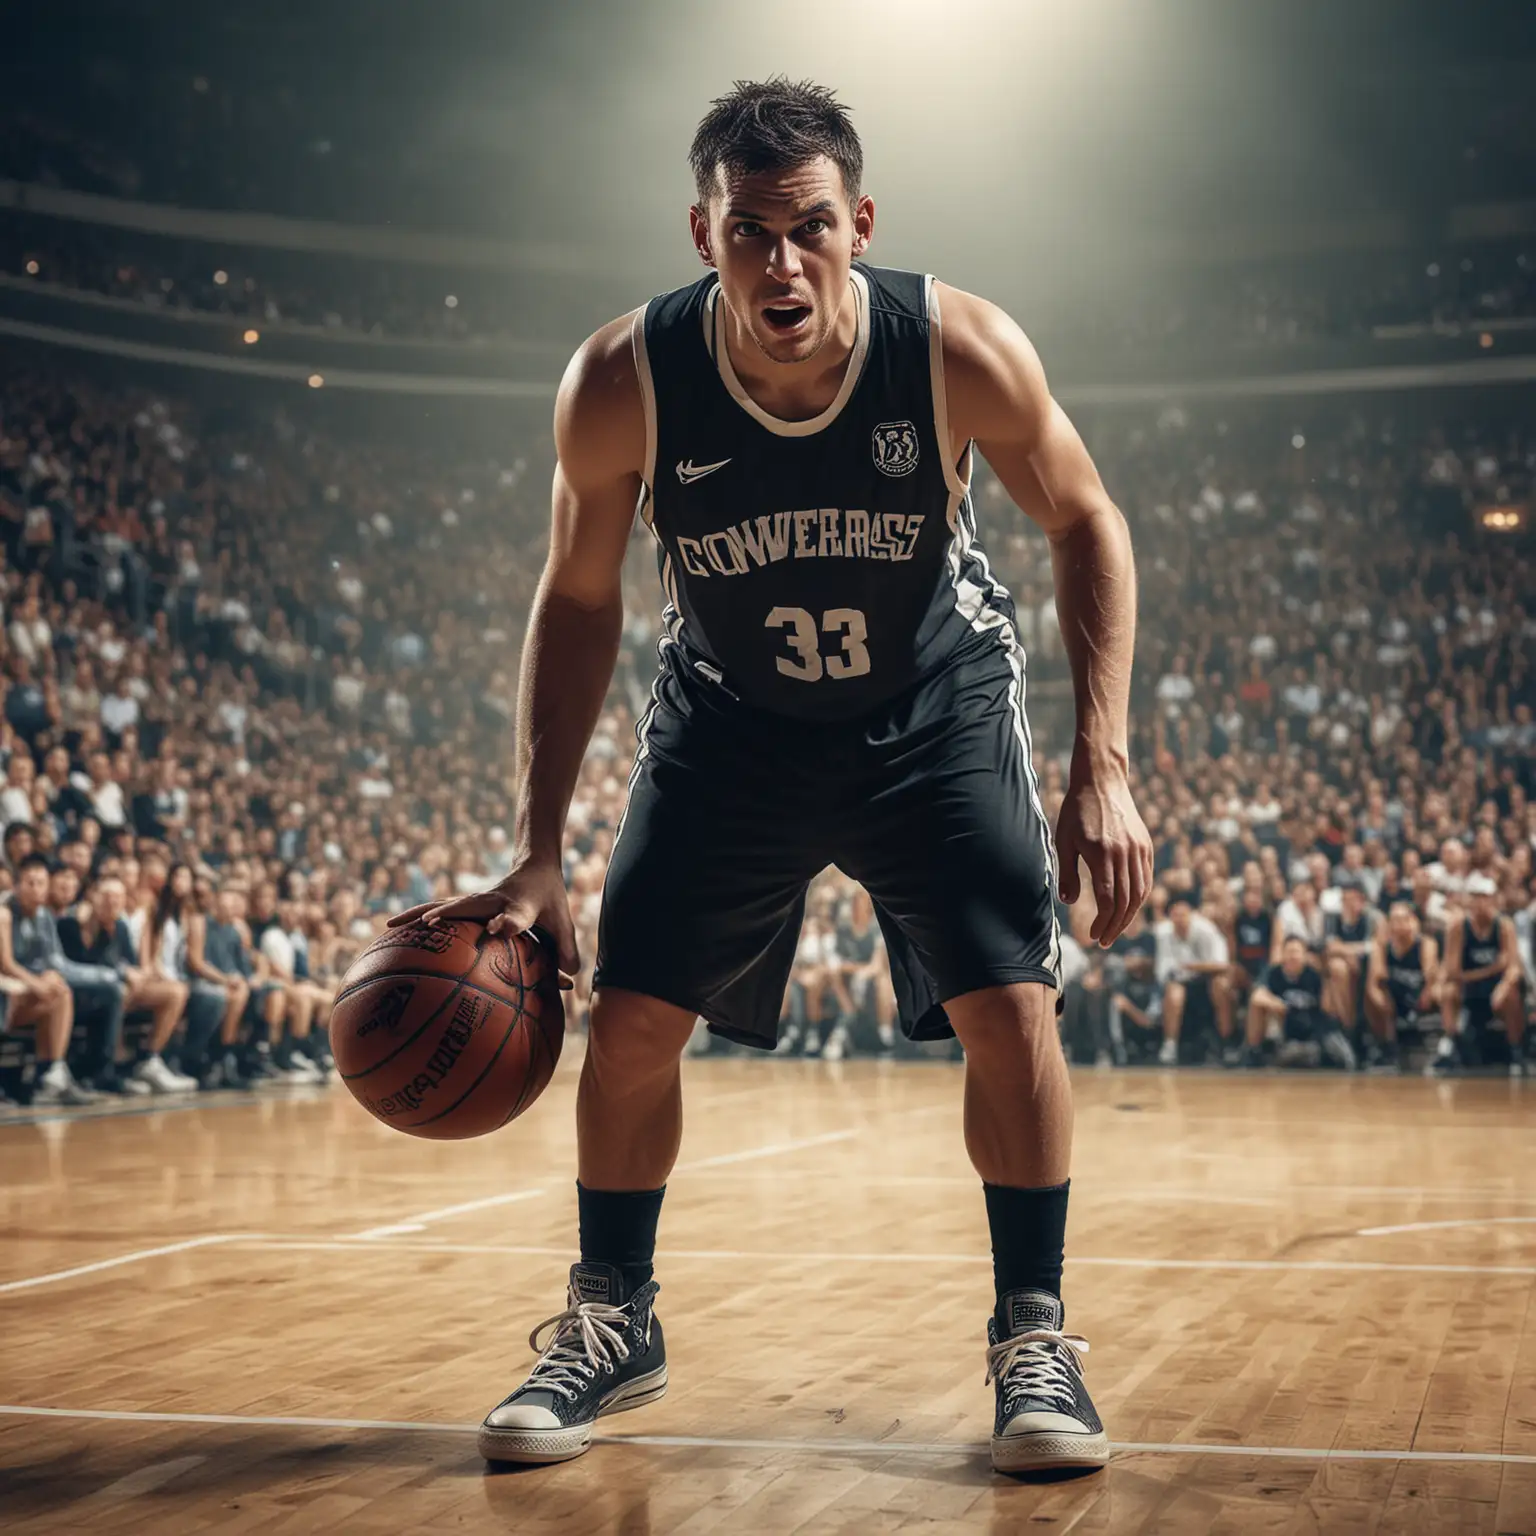 Dynamic Basketball Player Portrait with Fiery Expression and Stadium Crowd